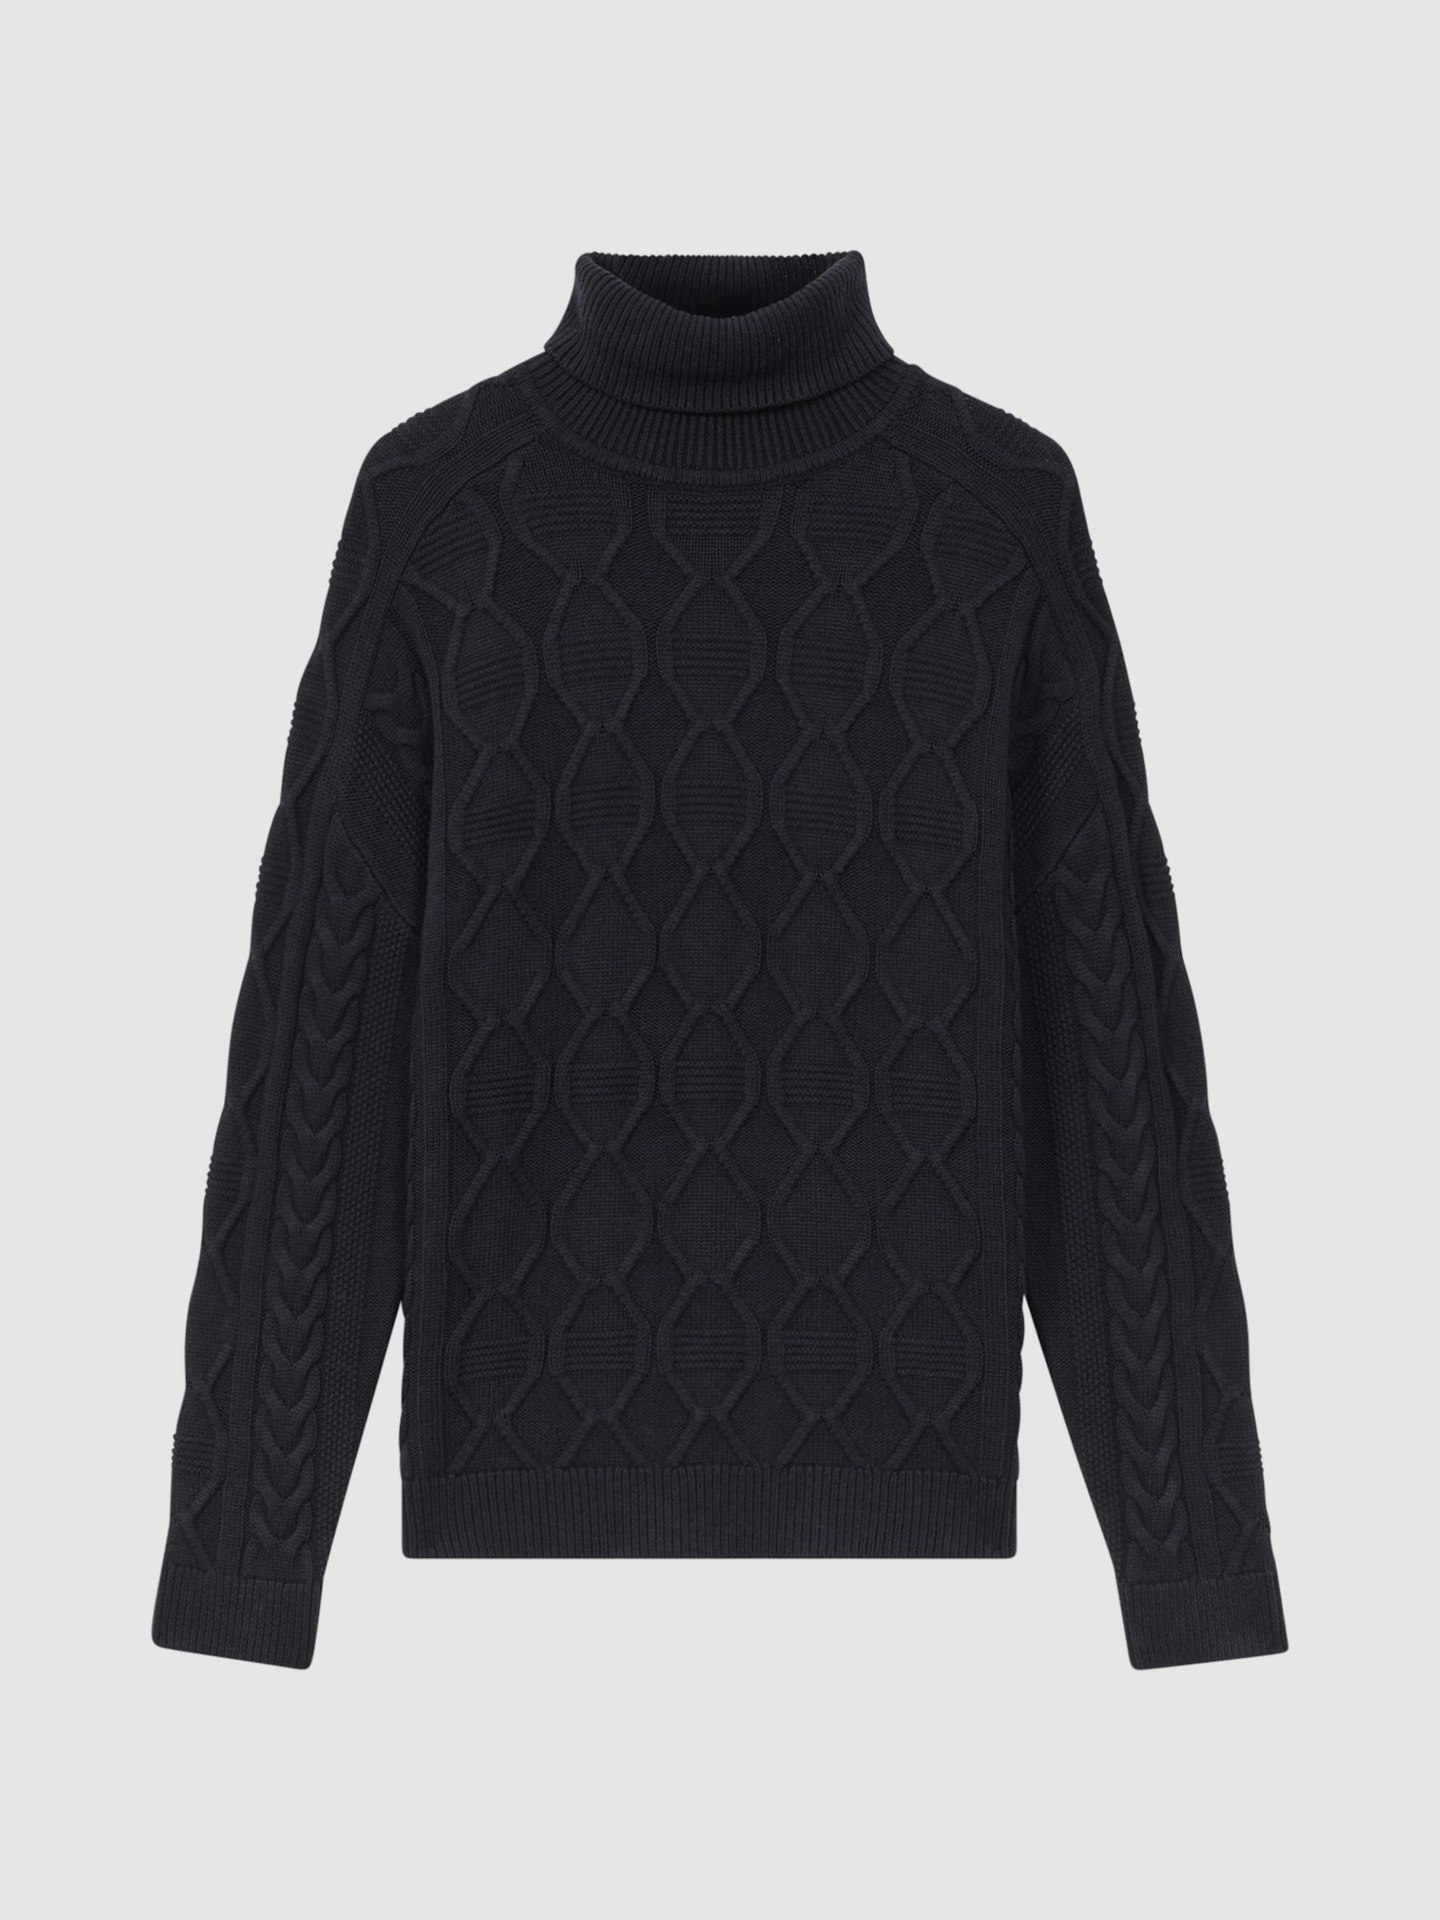 Reiss, Alston Cable-Knitted Roll-Neck Jumper